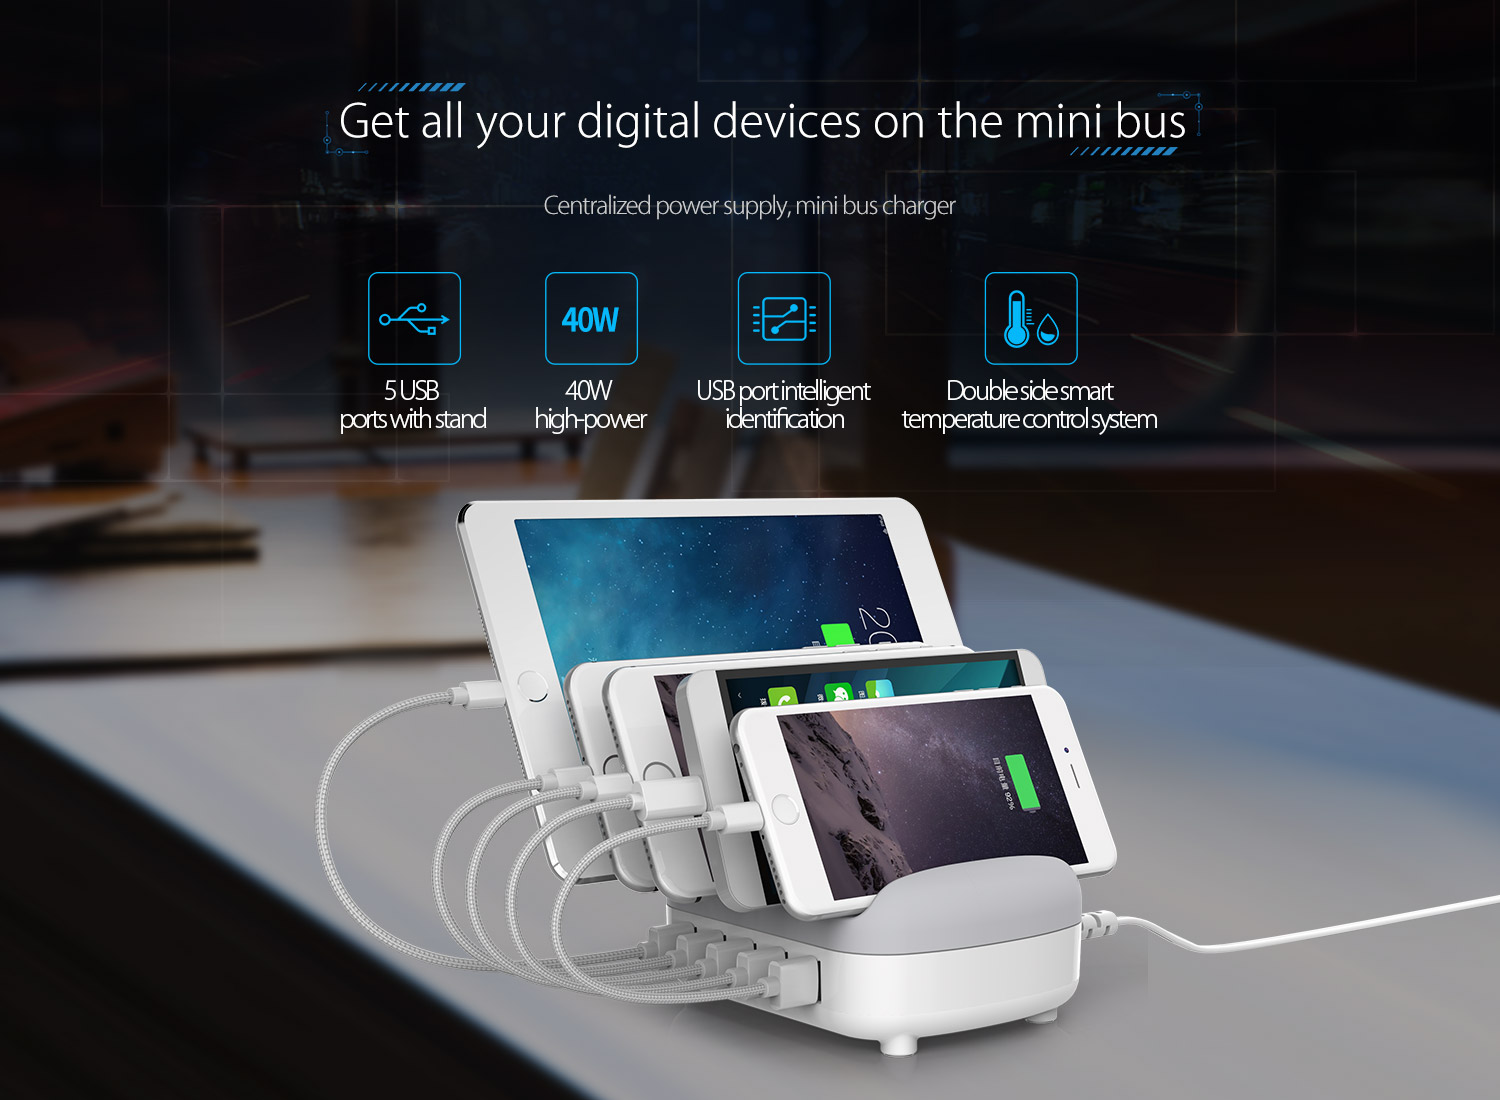 centralized power supply,mini bus charger